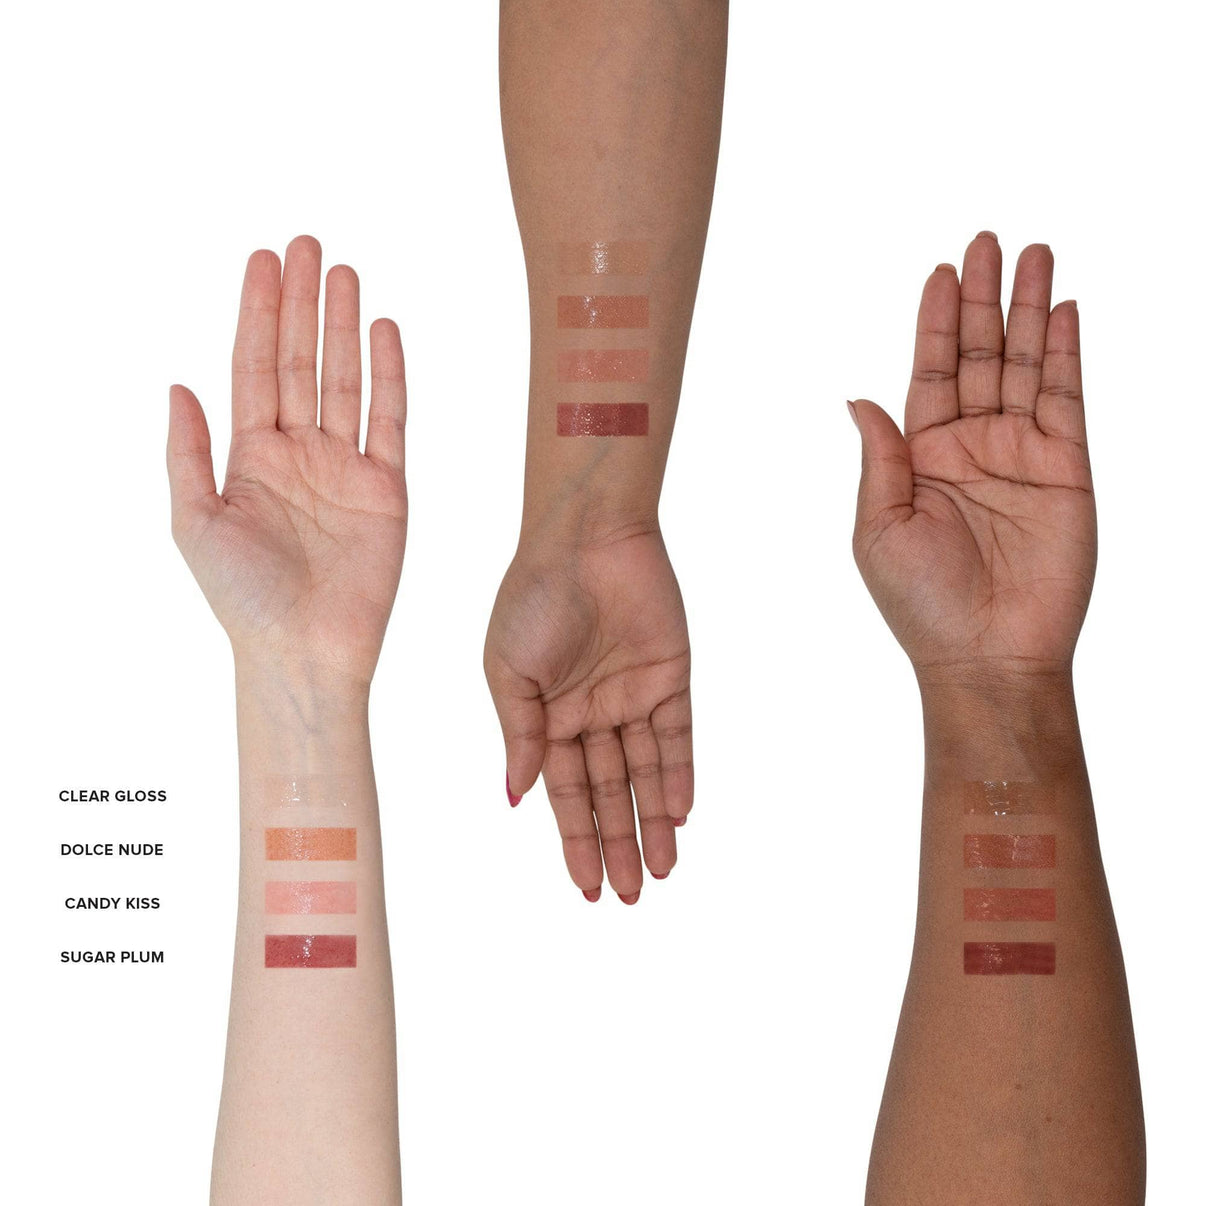 Three arms with Hydra-Peptide Lip Butter Dolce Nude texture swatches clear gloss